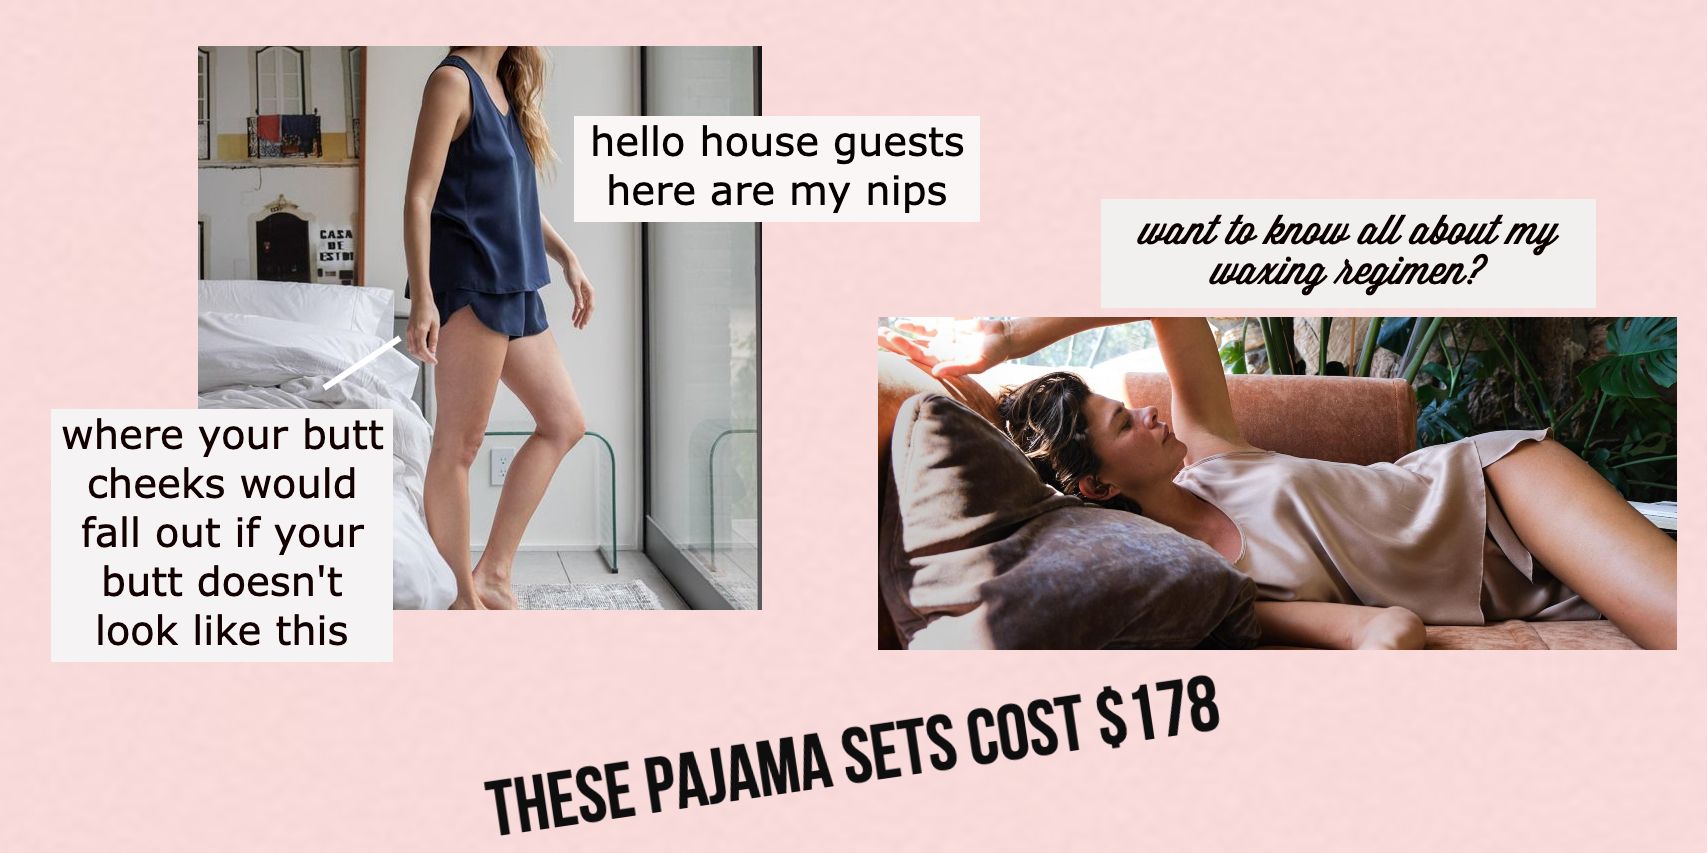 collage of images of flimsy pajamas with captions reading "hello house guests here are my nips," "where your butt cheeks would fall out if your butt doesn't look like this" [the model is very thin] and "want to know all about my waxing regimen?" A large banner at the bottom reads in all caps, "THESE PAJAMA SETS COST $178" 